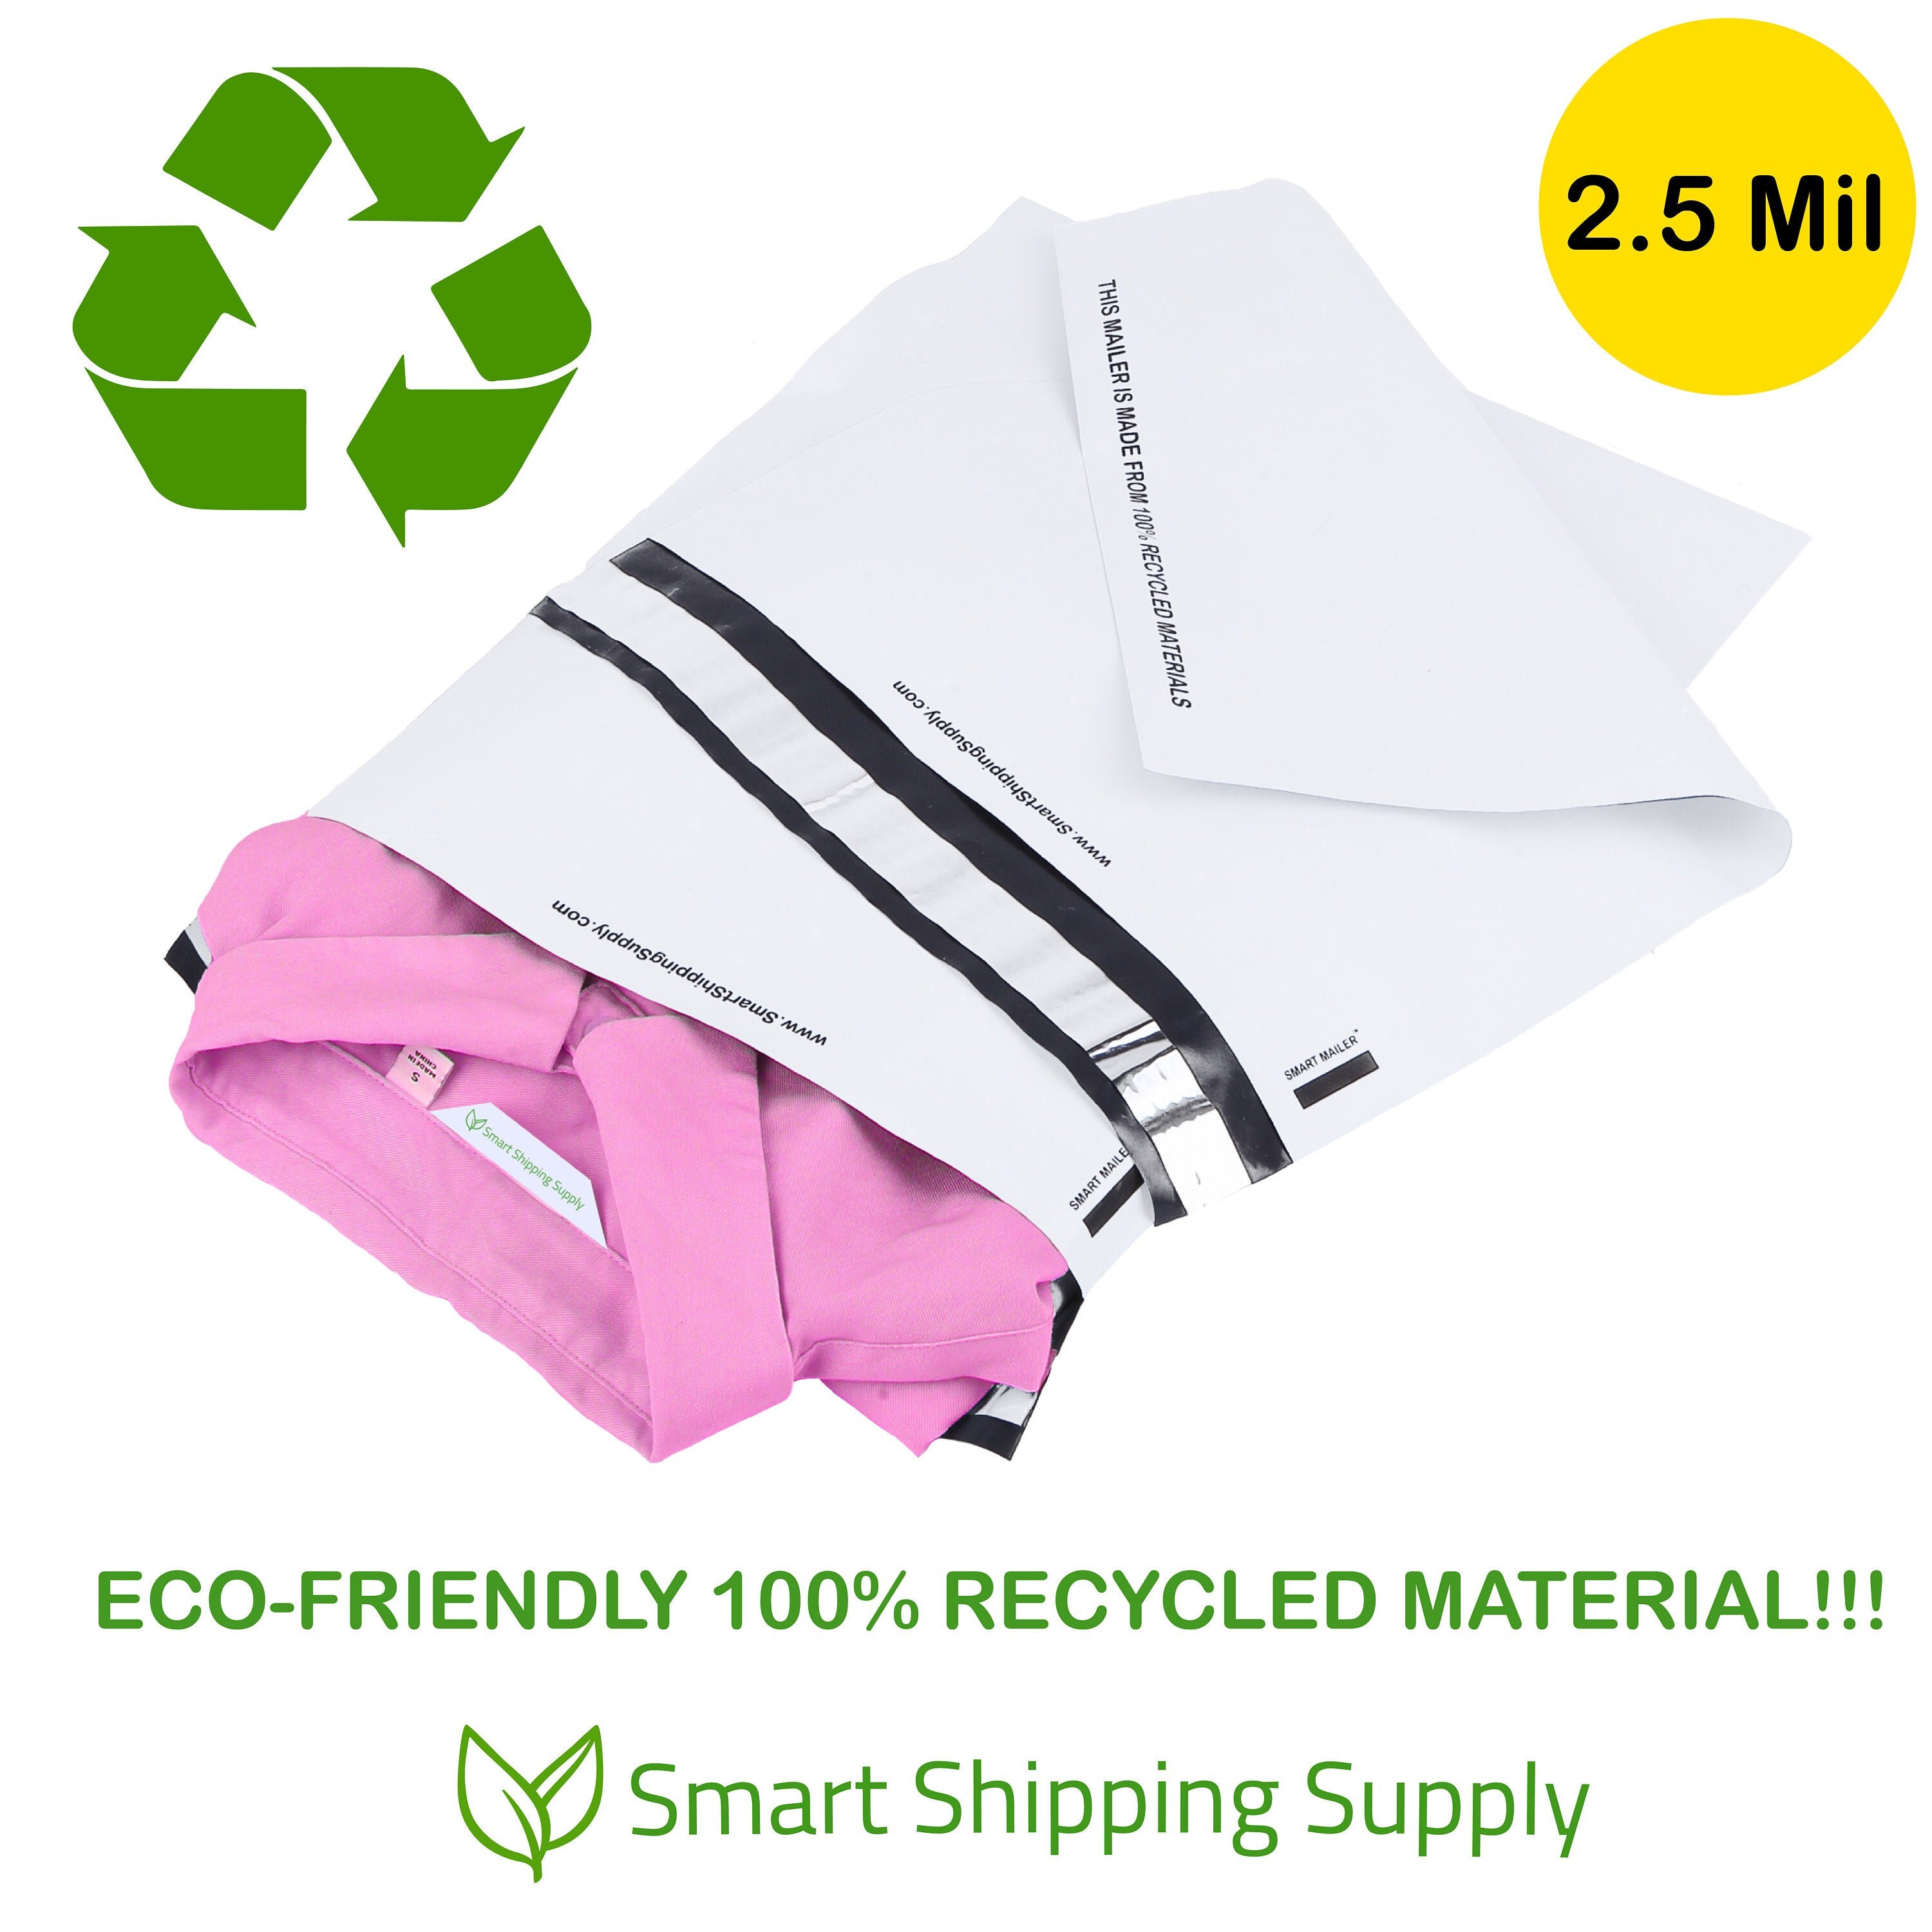 ** 100% Recycled ** Poly Mailers Shipping Envelope Plastic Mailing Bags 2.5 Mil 